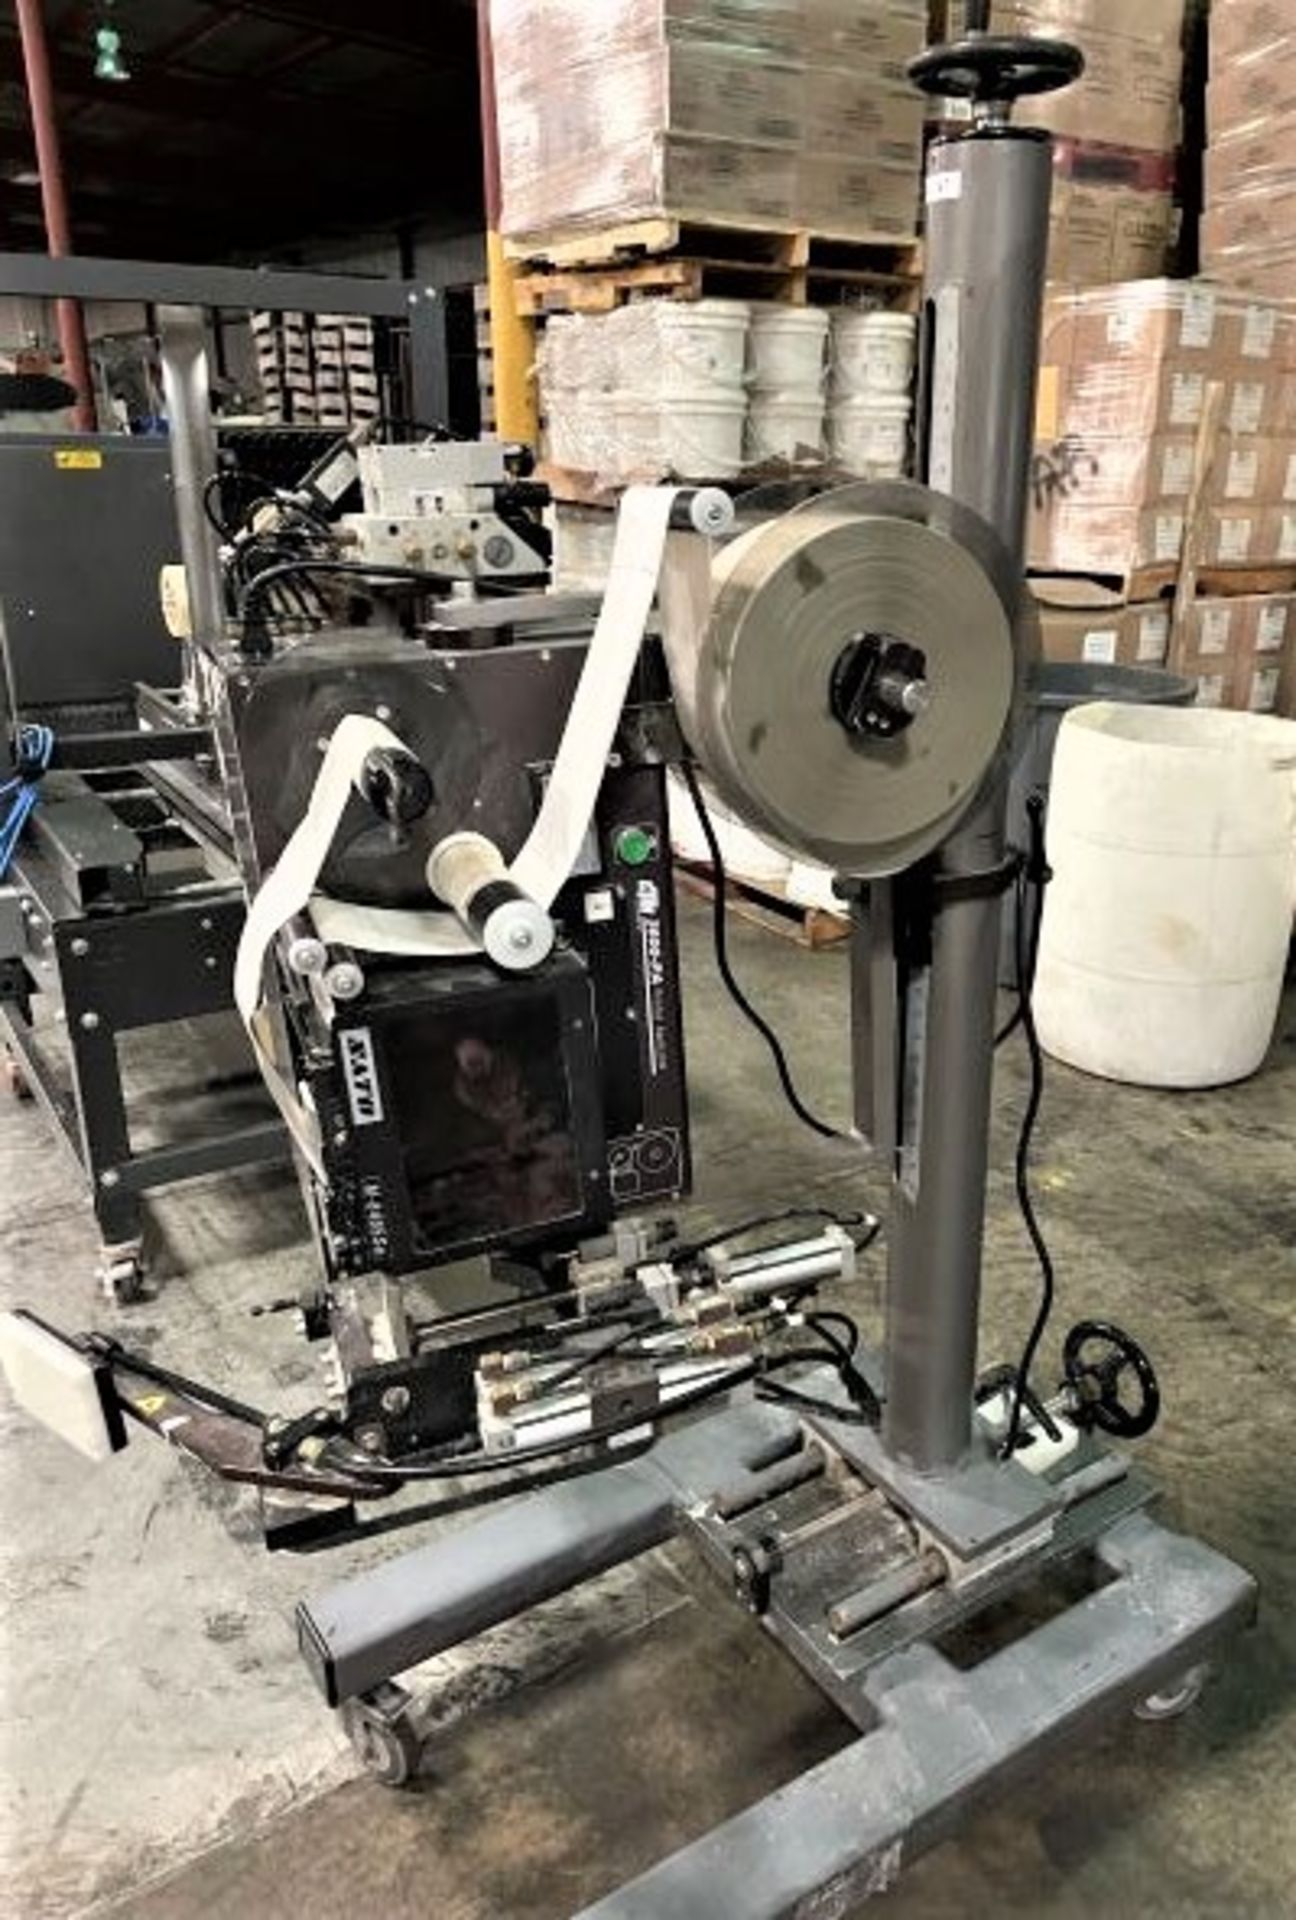 CTM Printer Applicator with Portable Stand and Parts Unit, Model 3600-PA, S/N 3600-0726-0504. - Image 5 of 14